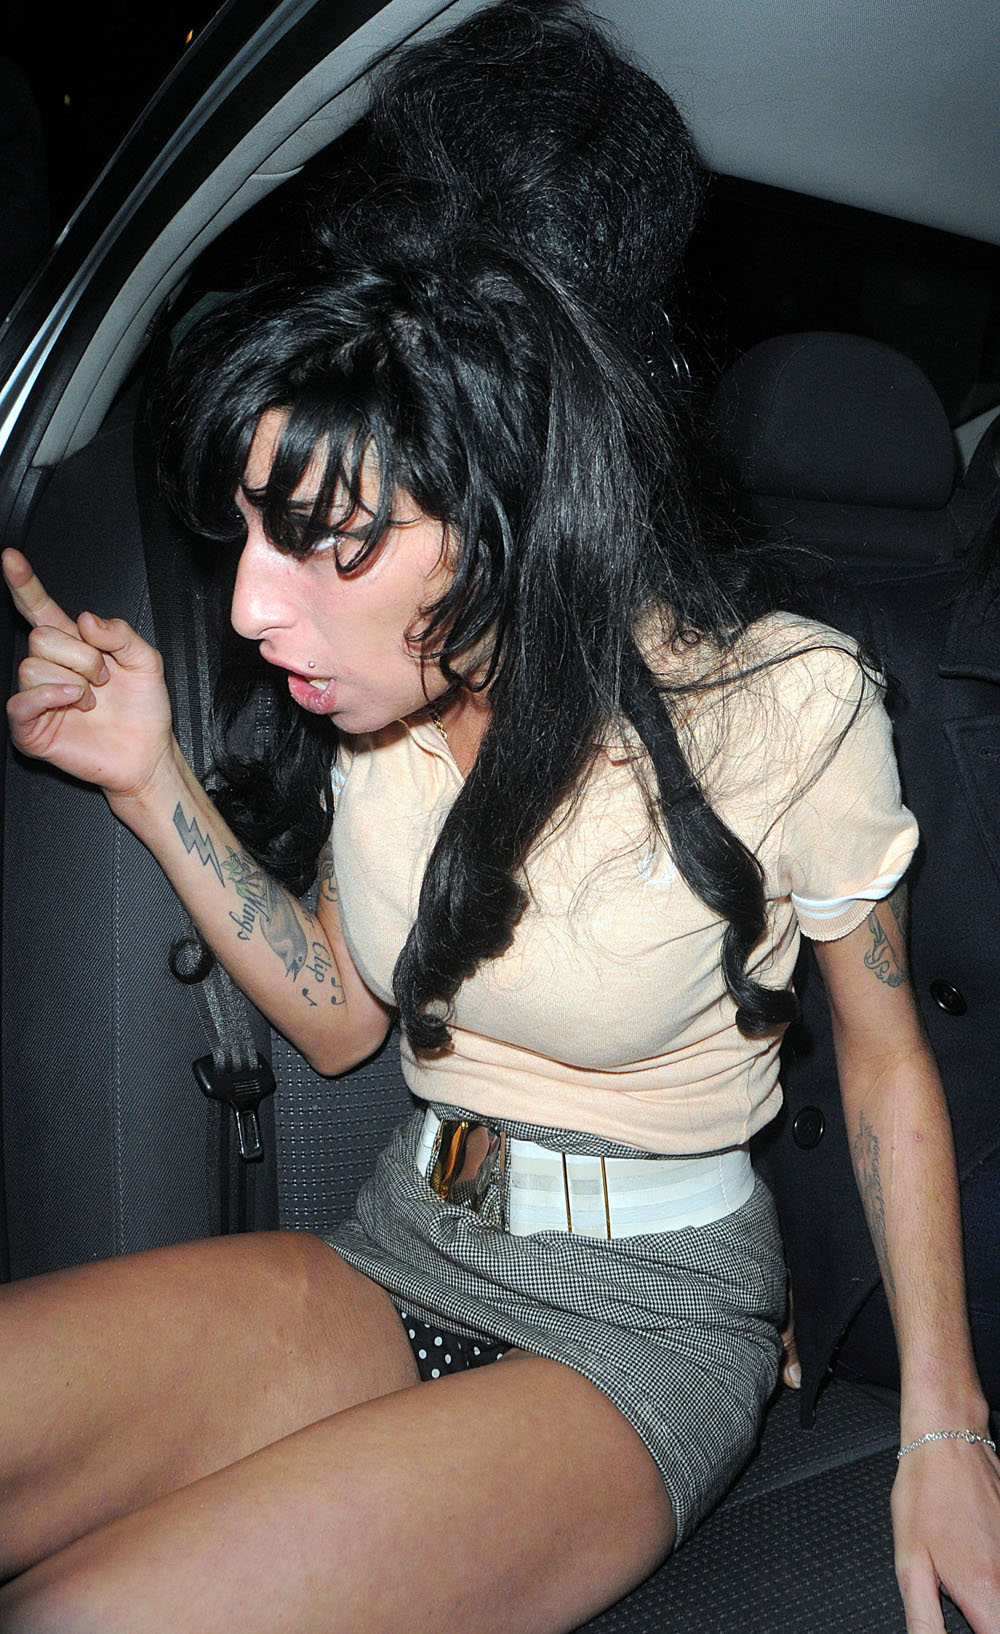 Amy Winehouse says her marriage is over; label rejects her new album: Viewi...